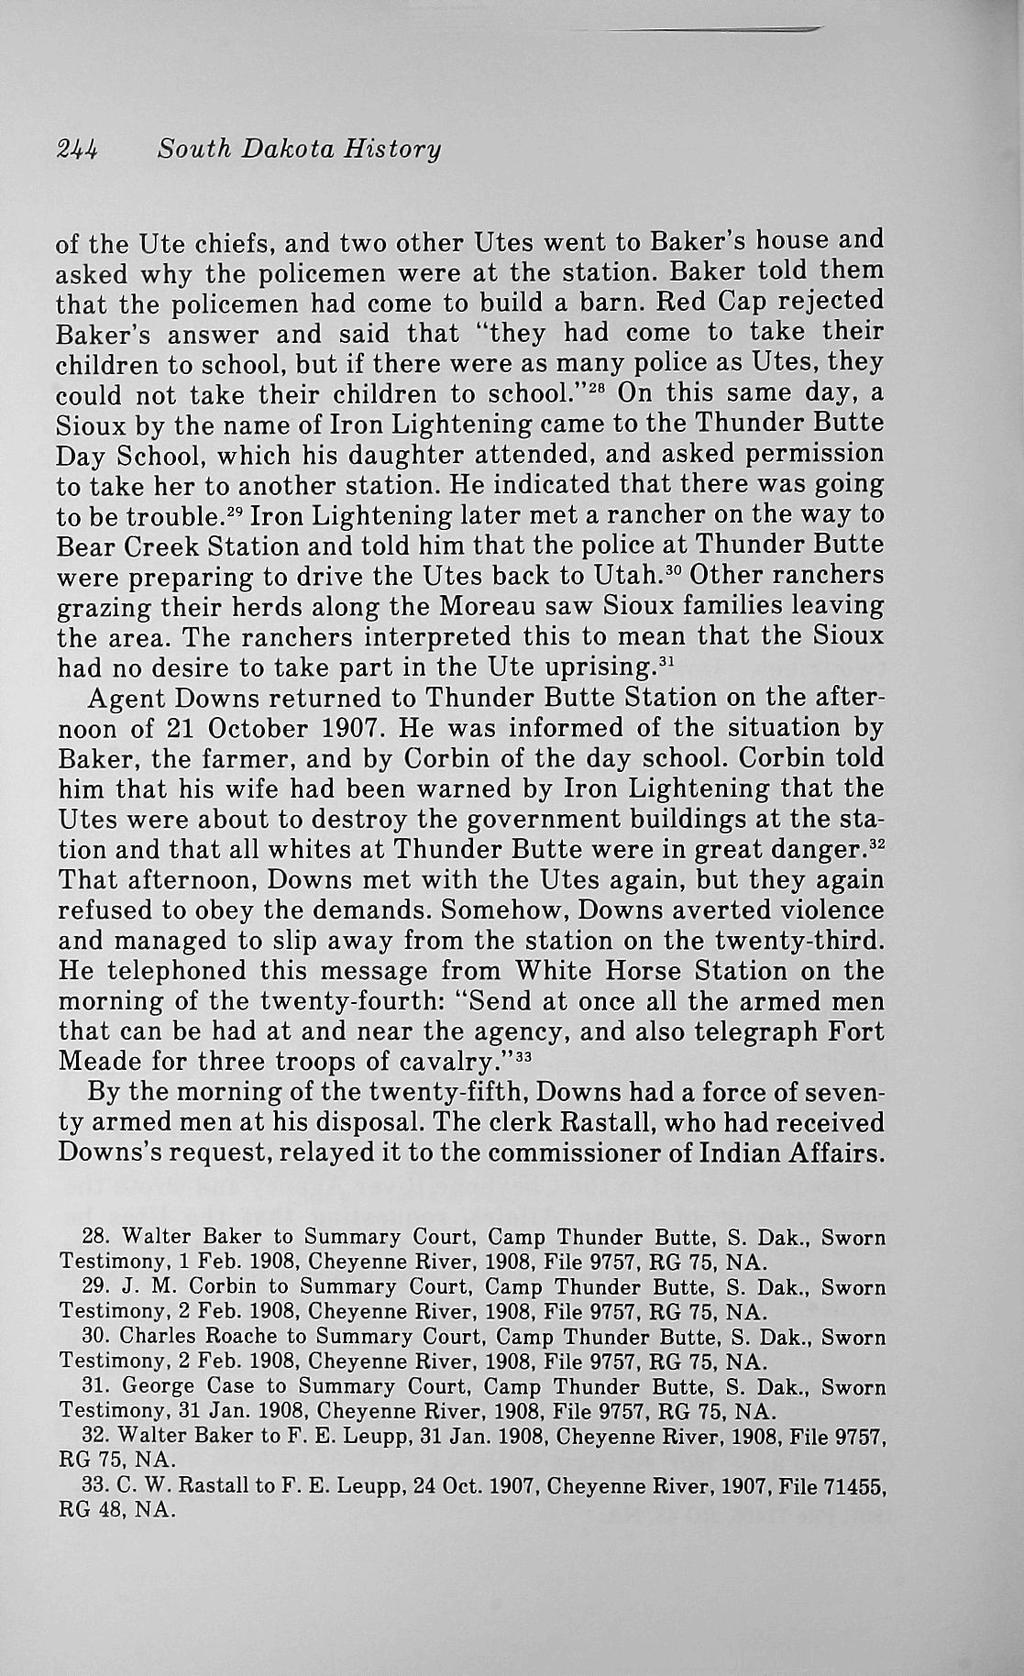 2H South Dakota History of the Ute chiefs, and two other Utes went to Baker's house and asked why the policemen were at the station. Baker told them that the policemen had come to build a barn.